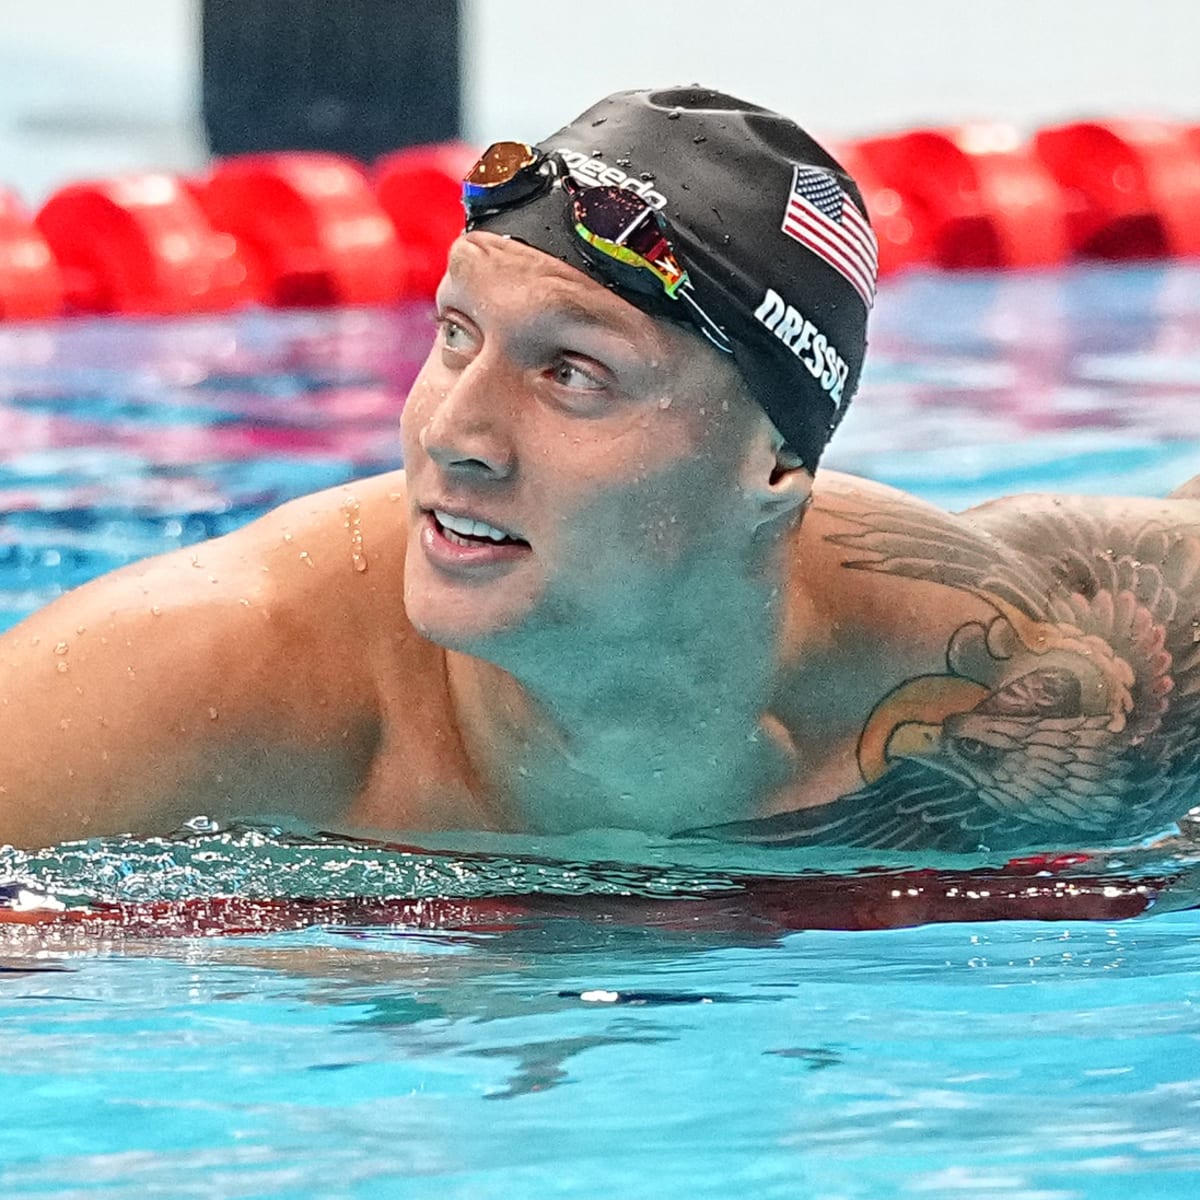 Caeleb Dressel proving value to Team USA in jam-packed Olympics